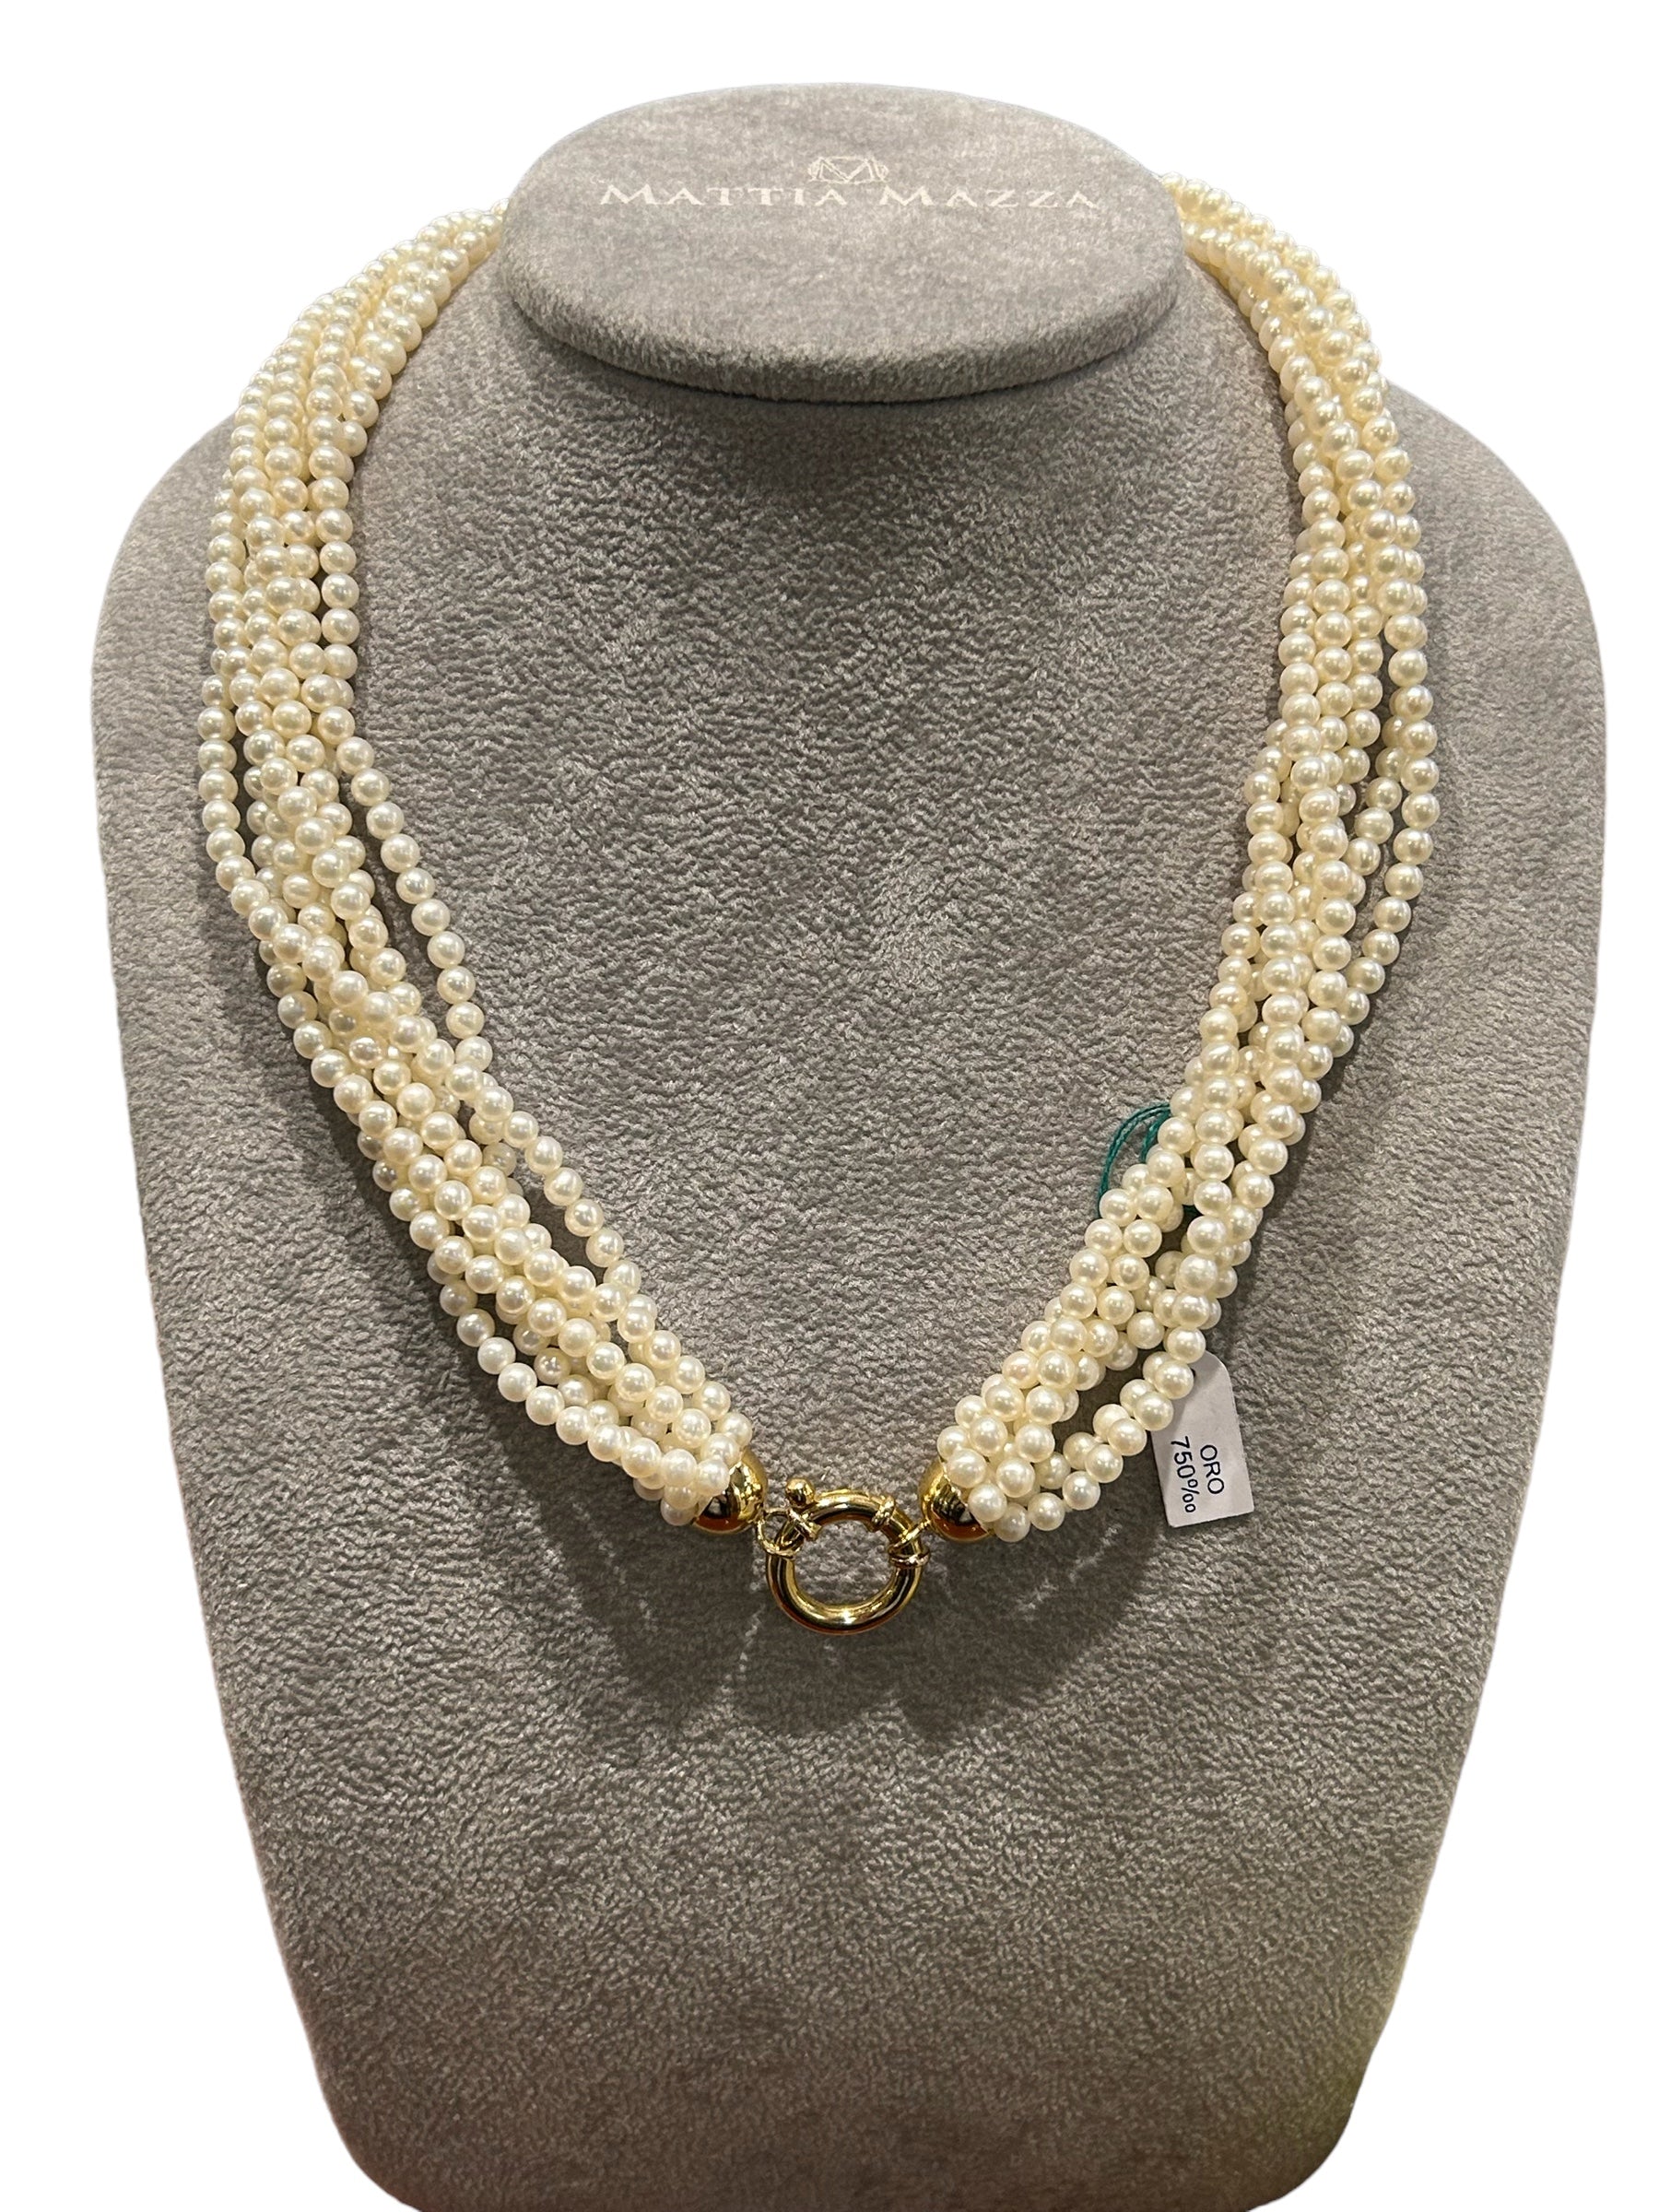 Mazza - Necklace with 7 strands of fresh water pearls - TORCHION